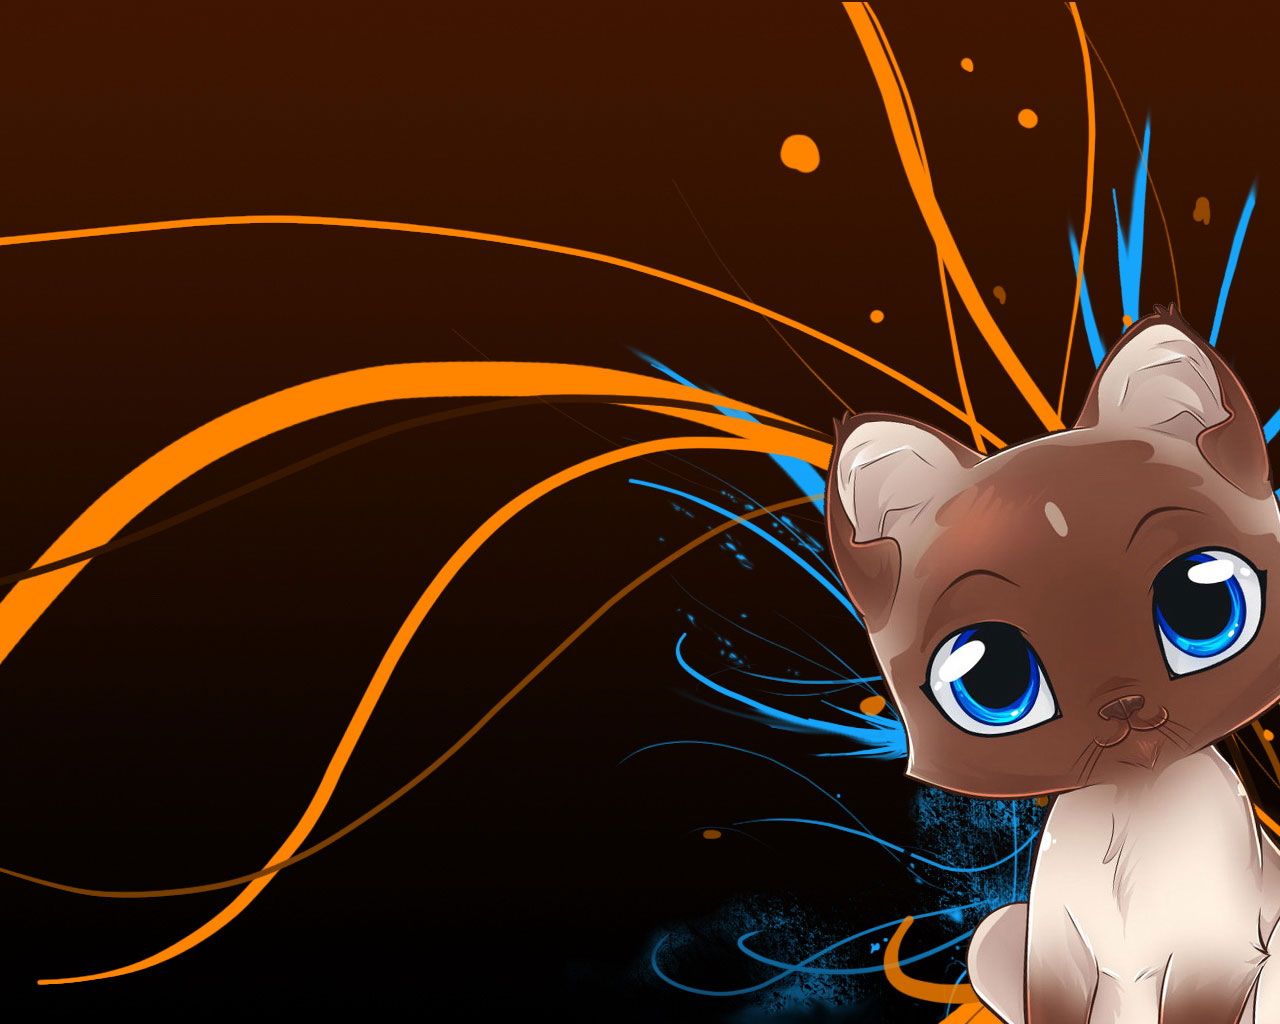 Anime Boy With Cat Kawaii Wallpapers Wallpaper Cave